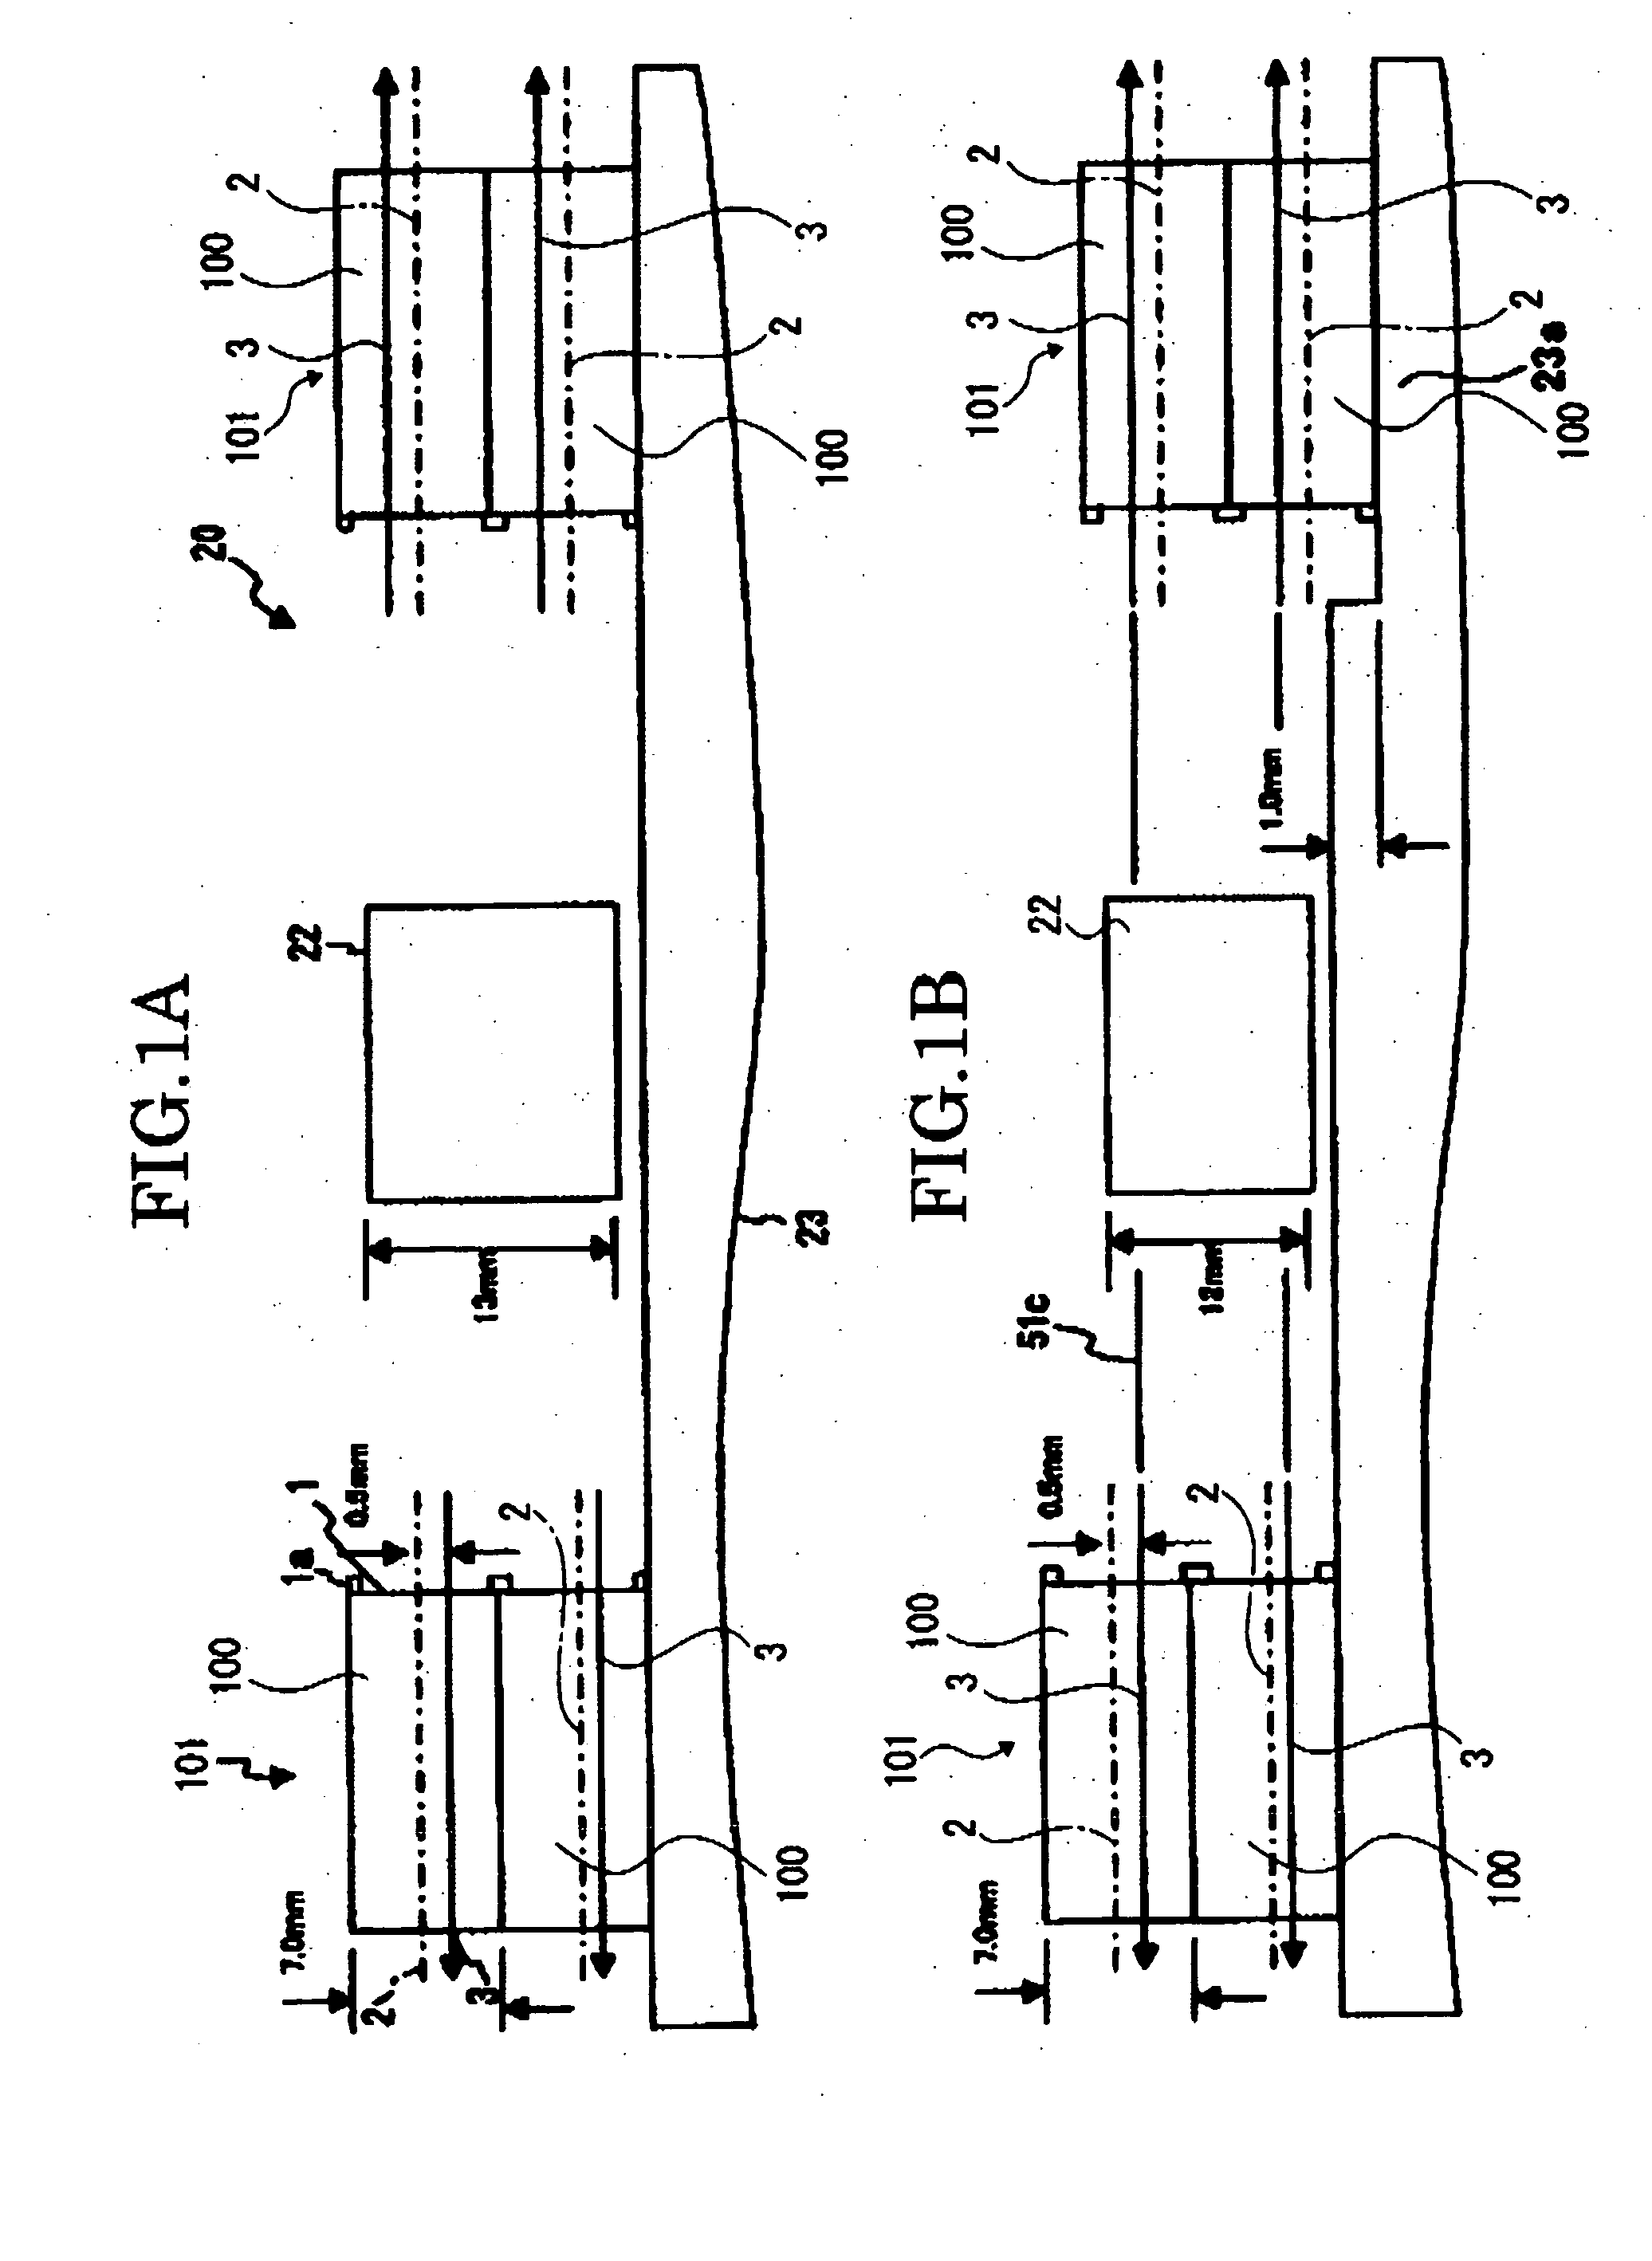 Plastic optical element, mold for forming the plastic optical element, light scanning device and image forming apparatus having the light scanning device